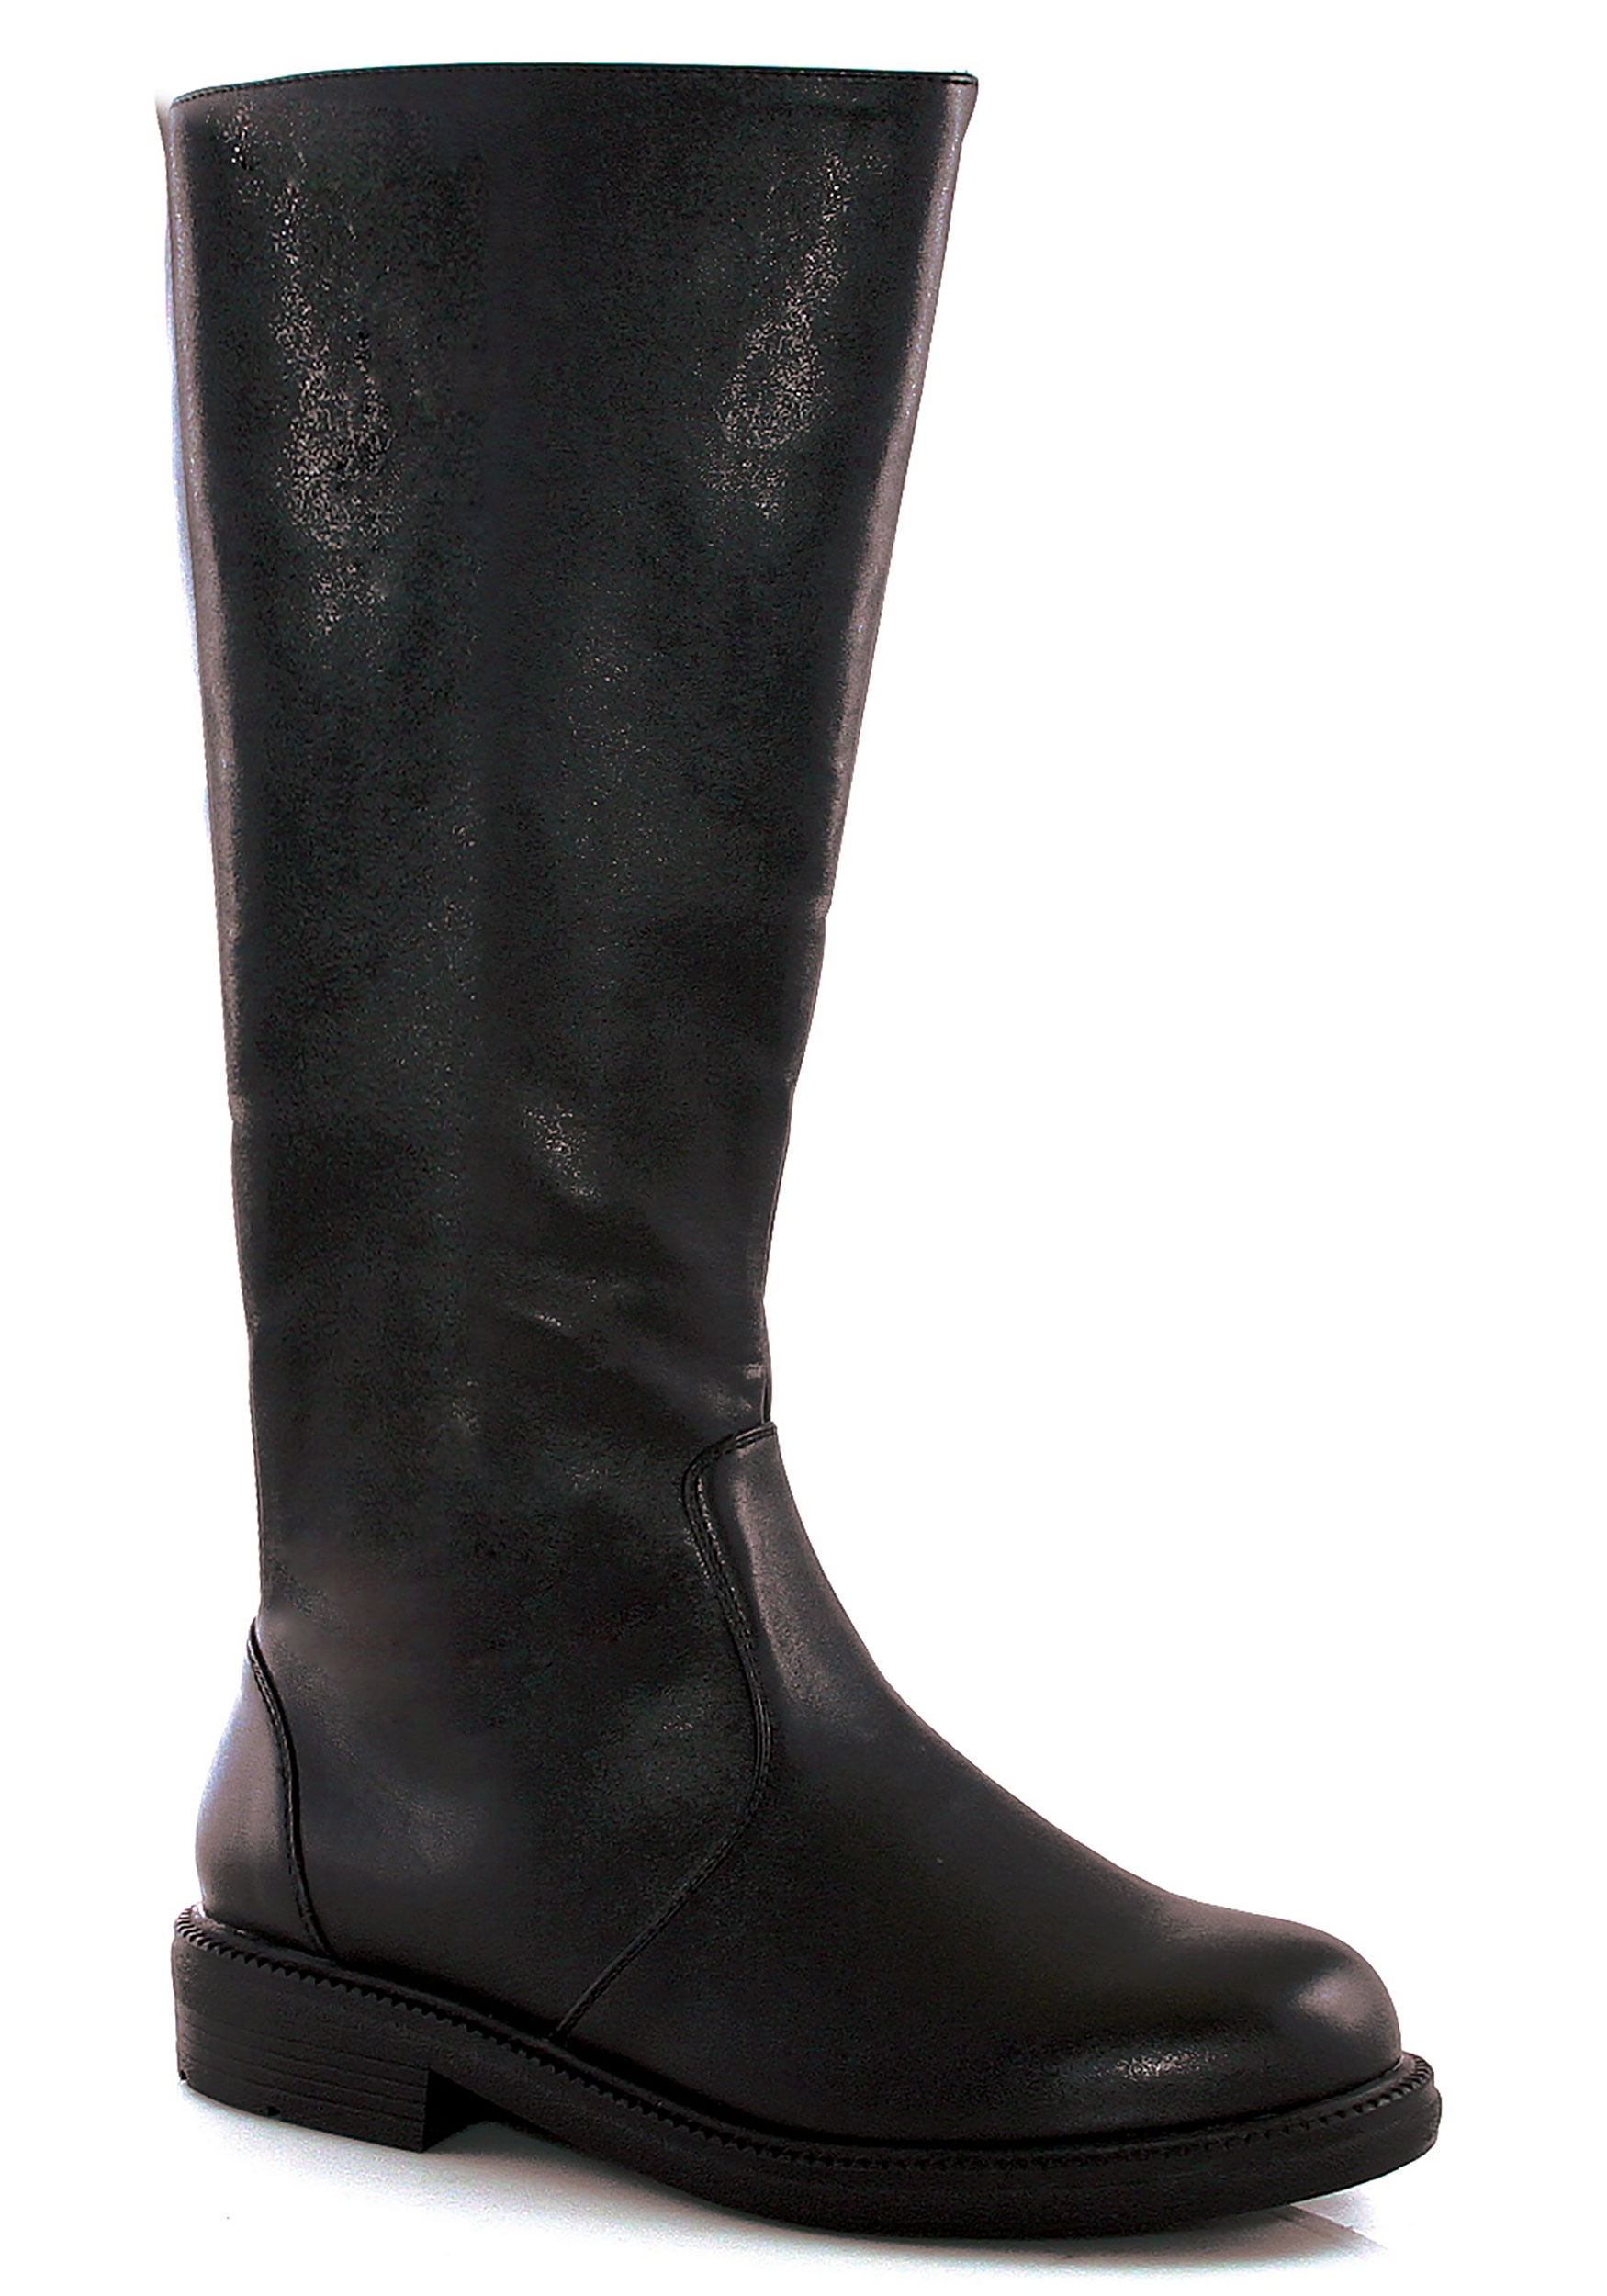 Image of Men's Tall Black Costume Boots ID EE125MATEY-M